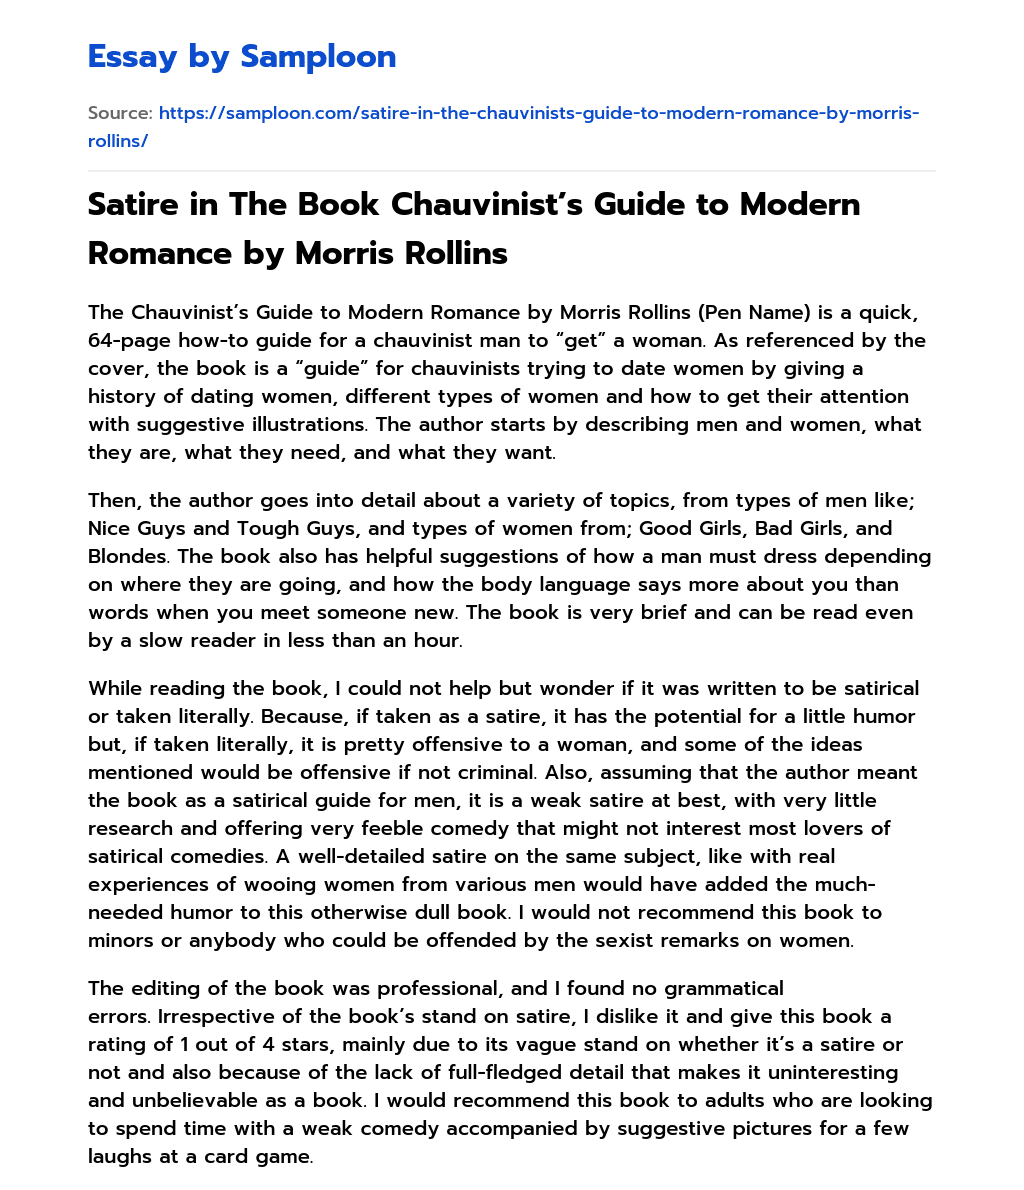 Satire in The Book Chauvinist’s Guide to Modern Romance by Morris Rollins essay